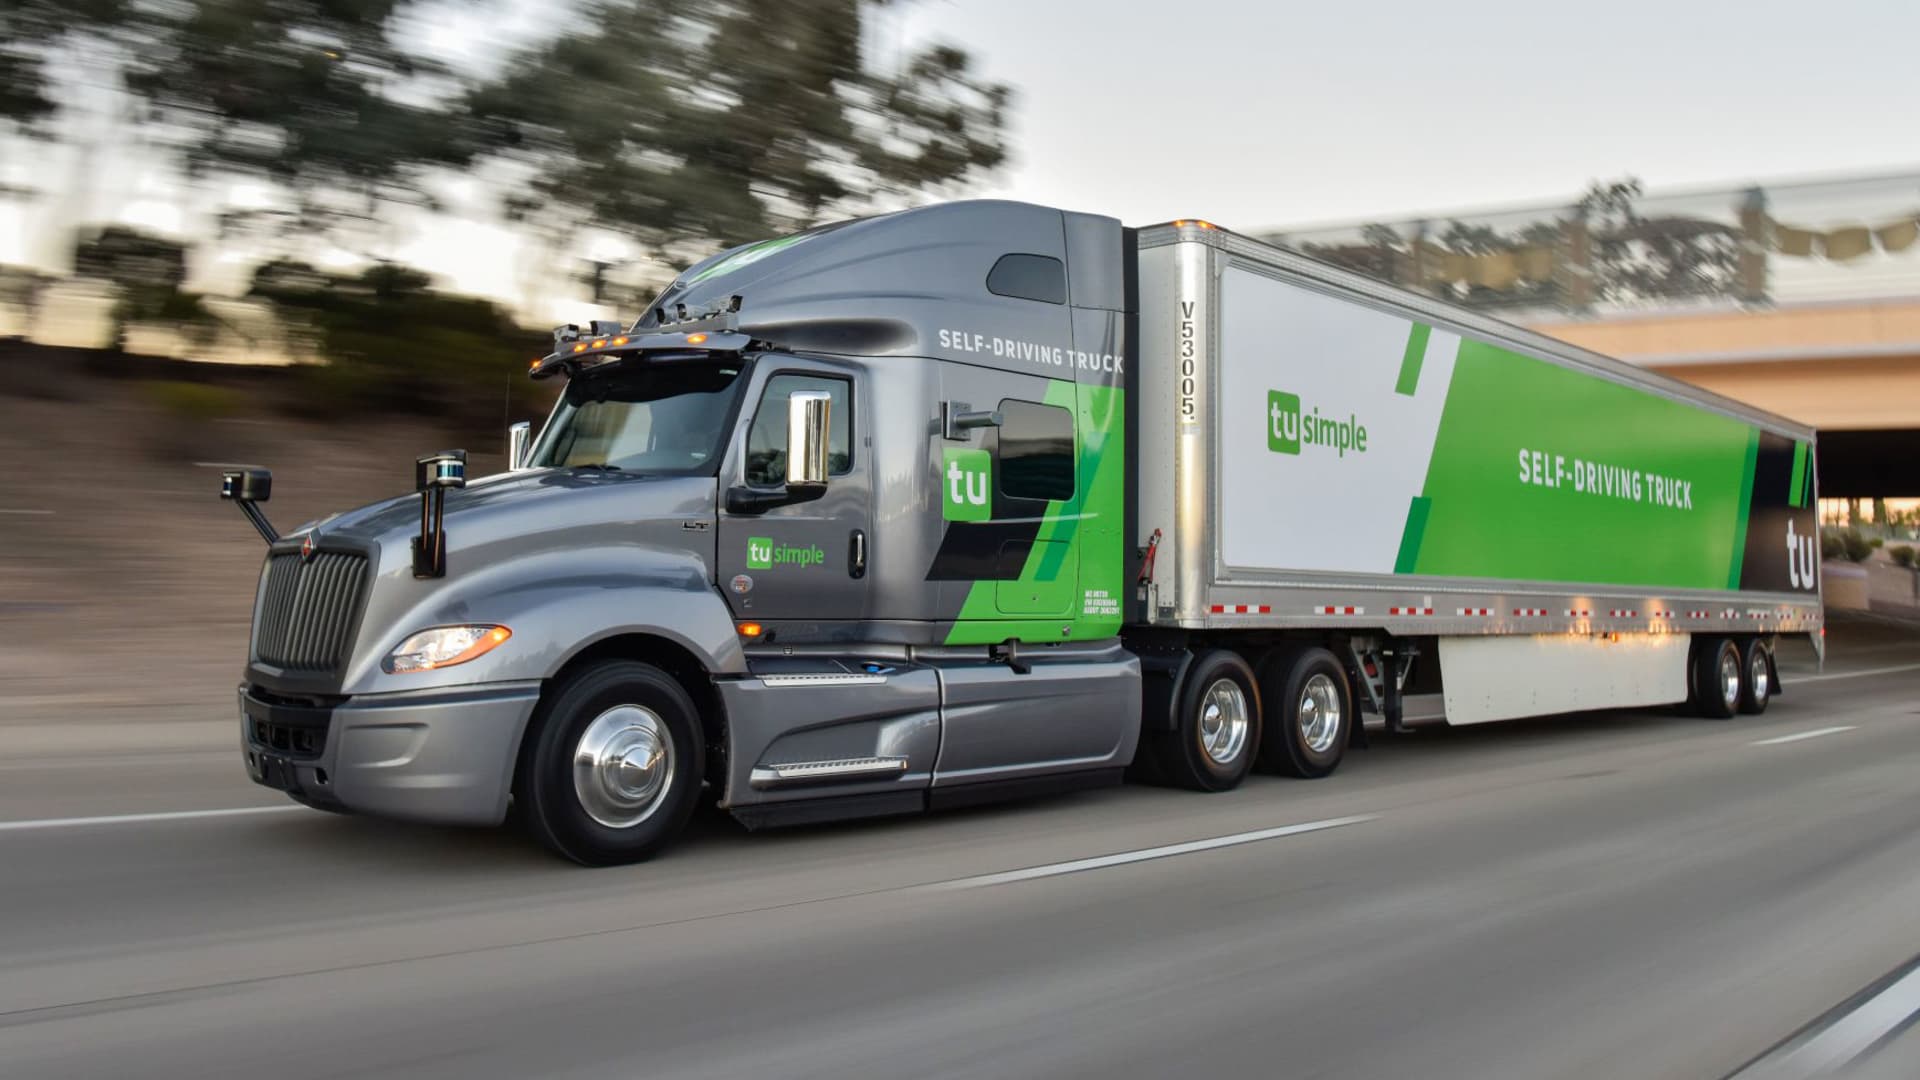 Self-driving truck startup TuSimple fires its CEO over improper ties to a Chinese firm